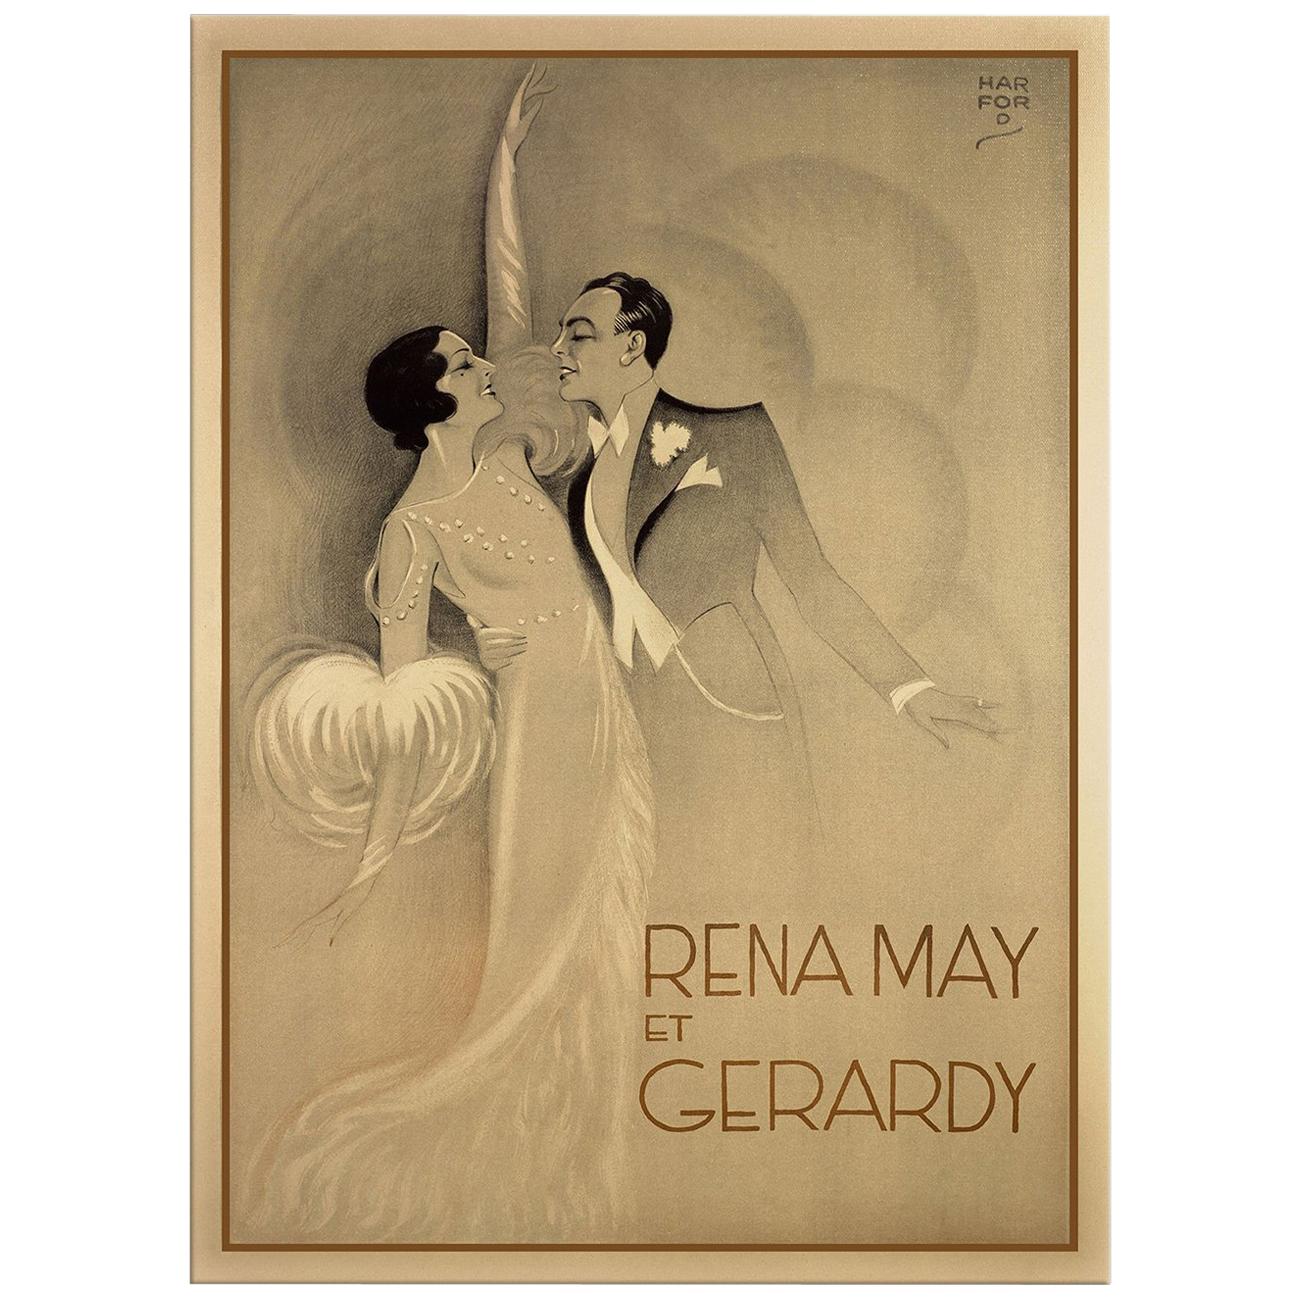 Rena May et Gerardy, after Art Deco Poster by the Artist Harford For Sale